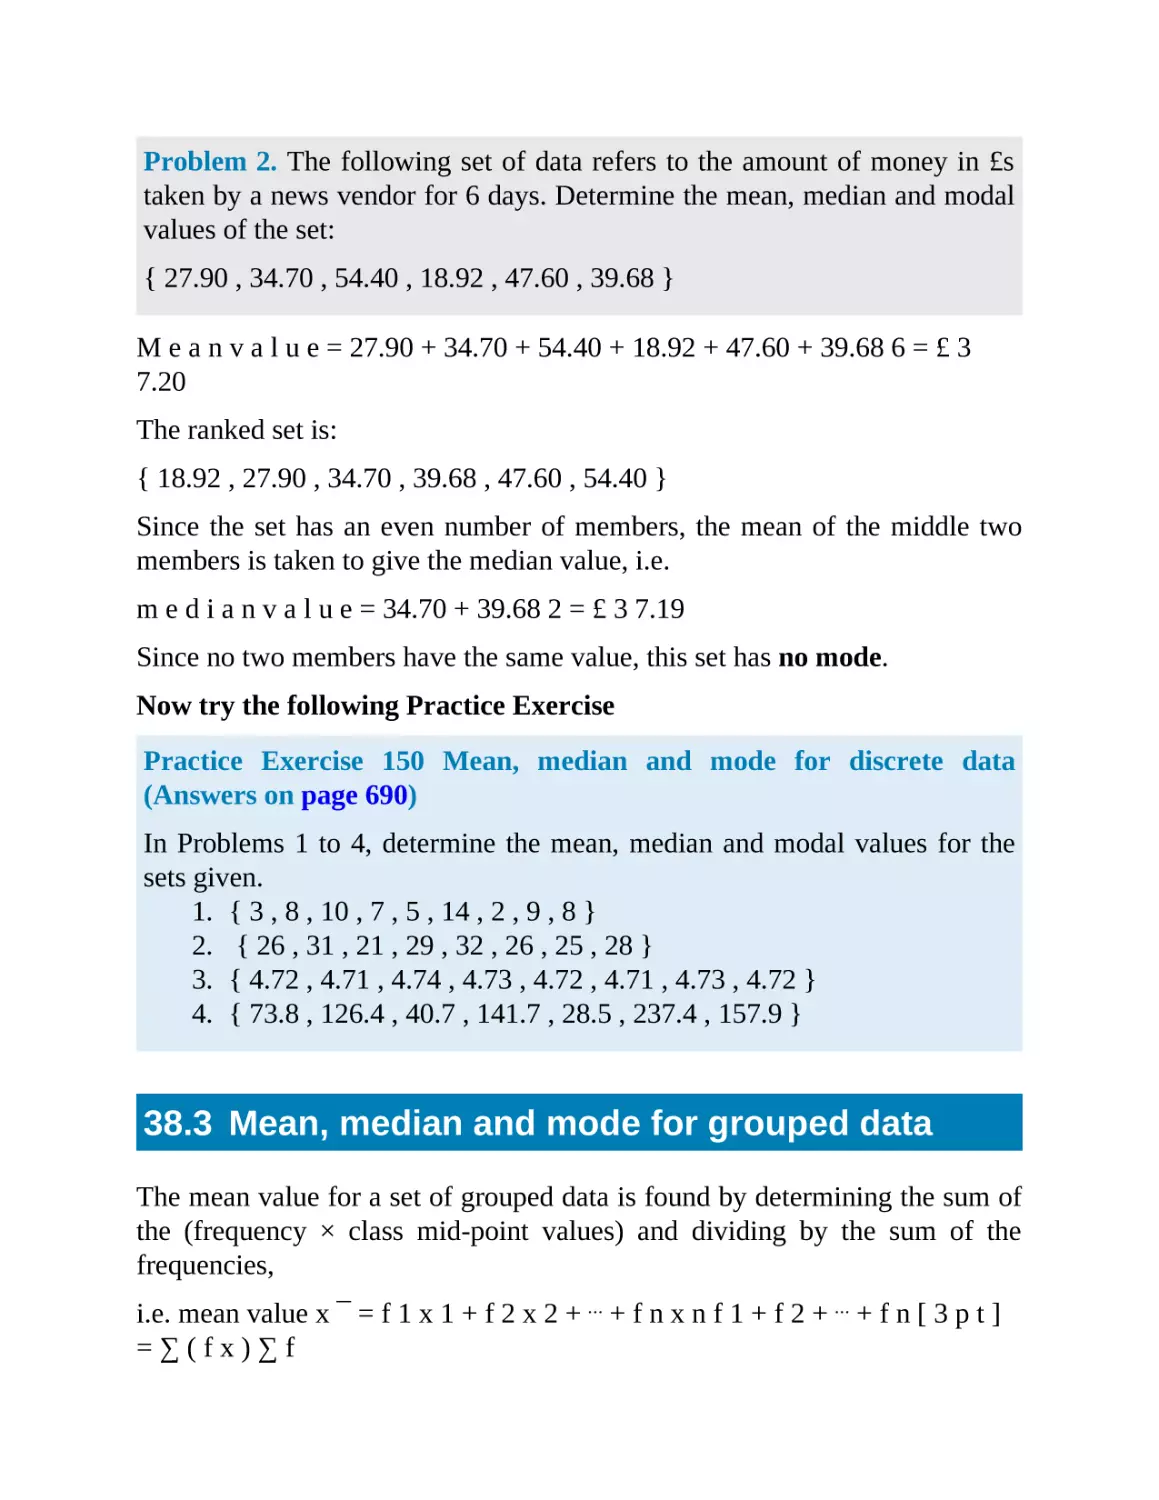 38.3 Mean, median and mode for grouped data